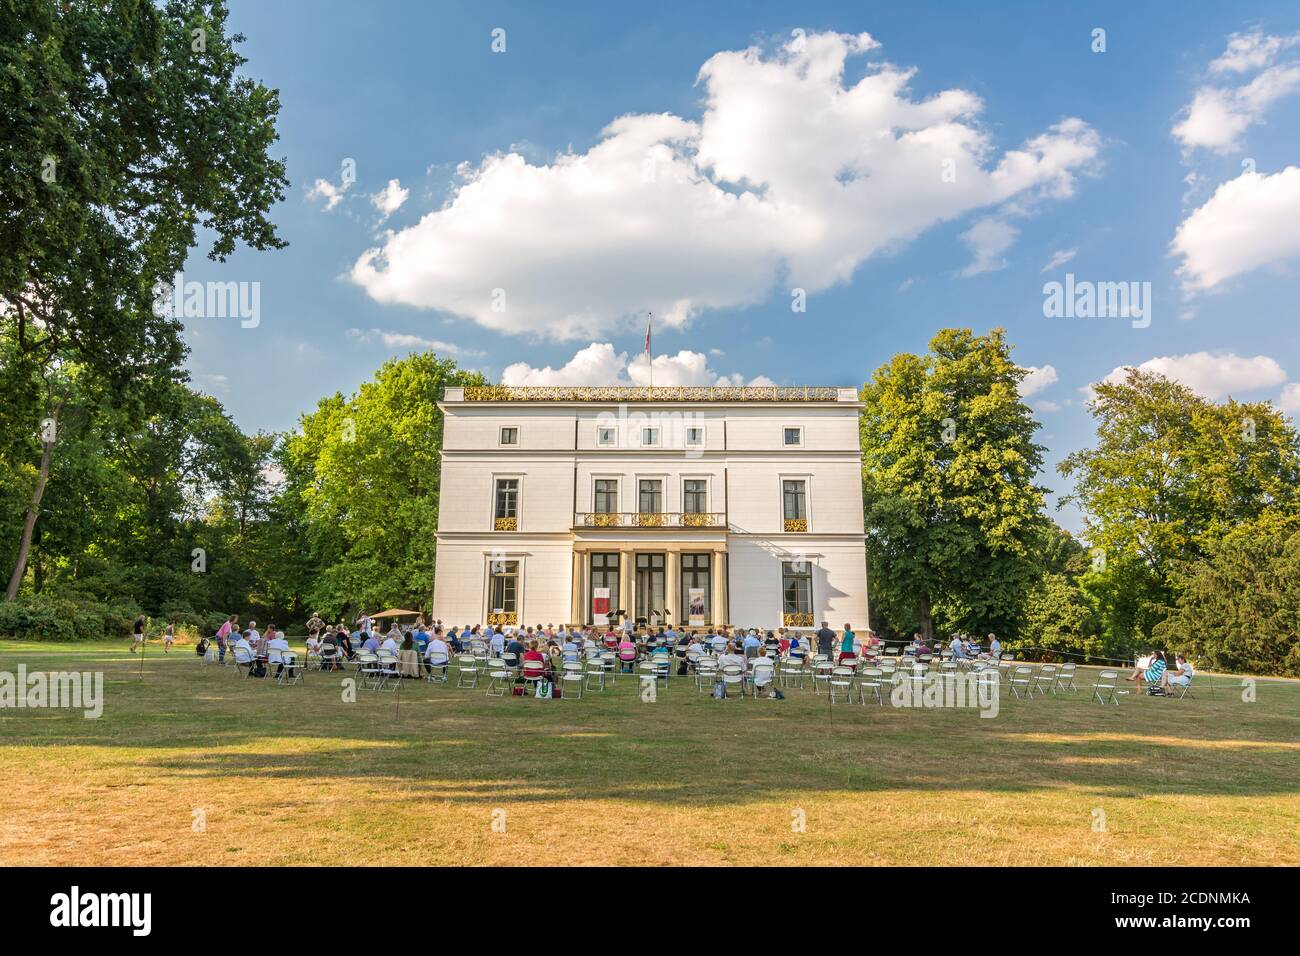 Audience of an outdoor concert in a park (Jenischpark in Hamburg, Germany) in front of a beautiful white mansion in summer Stock Photo